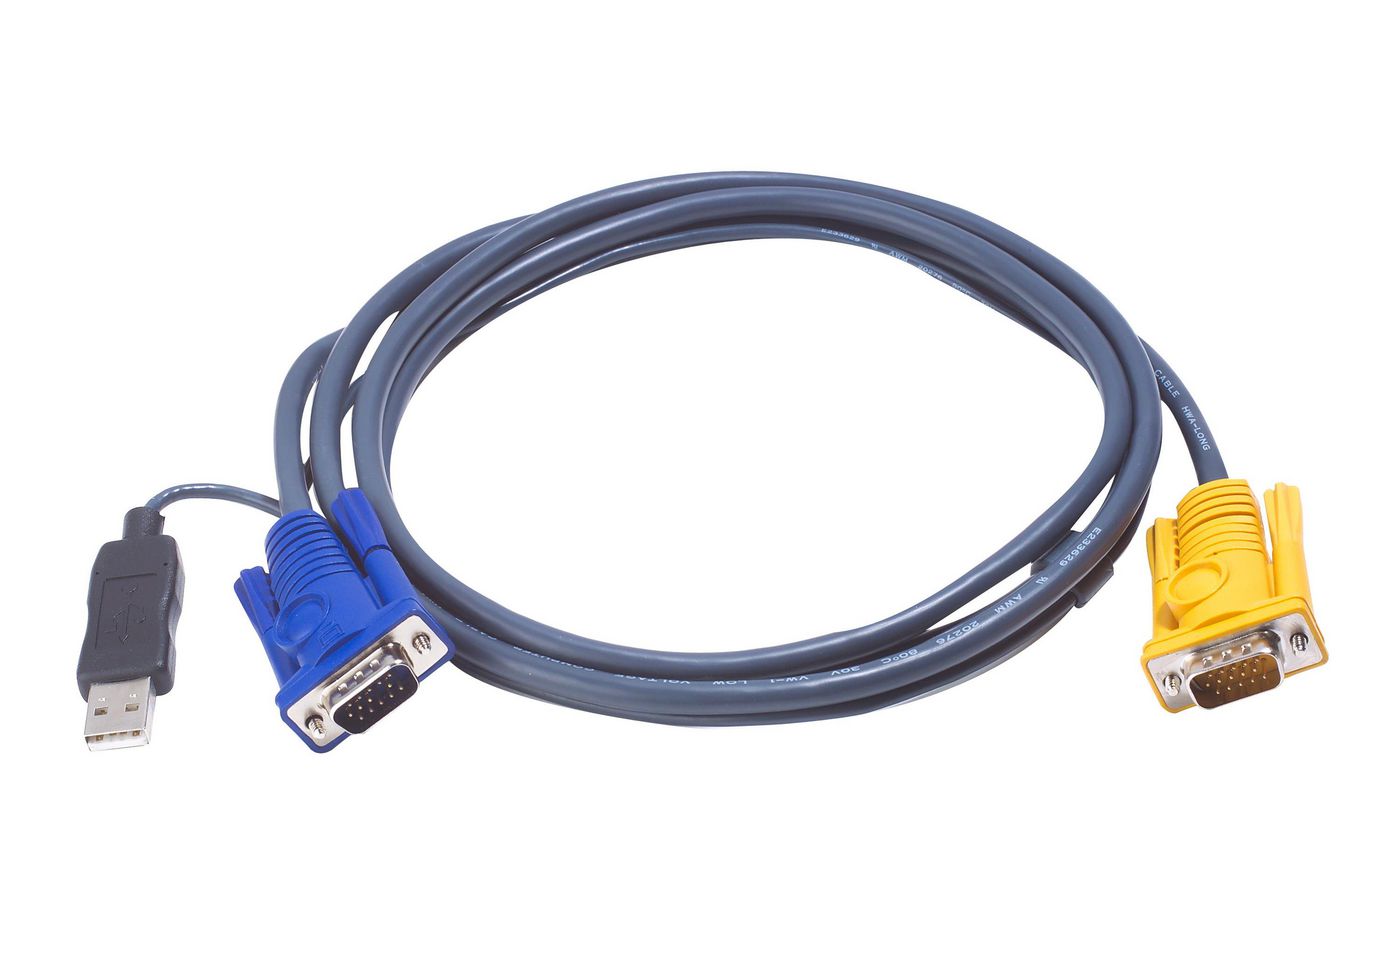 Aten 2L-5202UP USB Cable 1.8m 